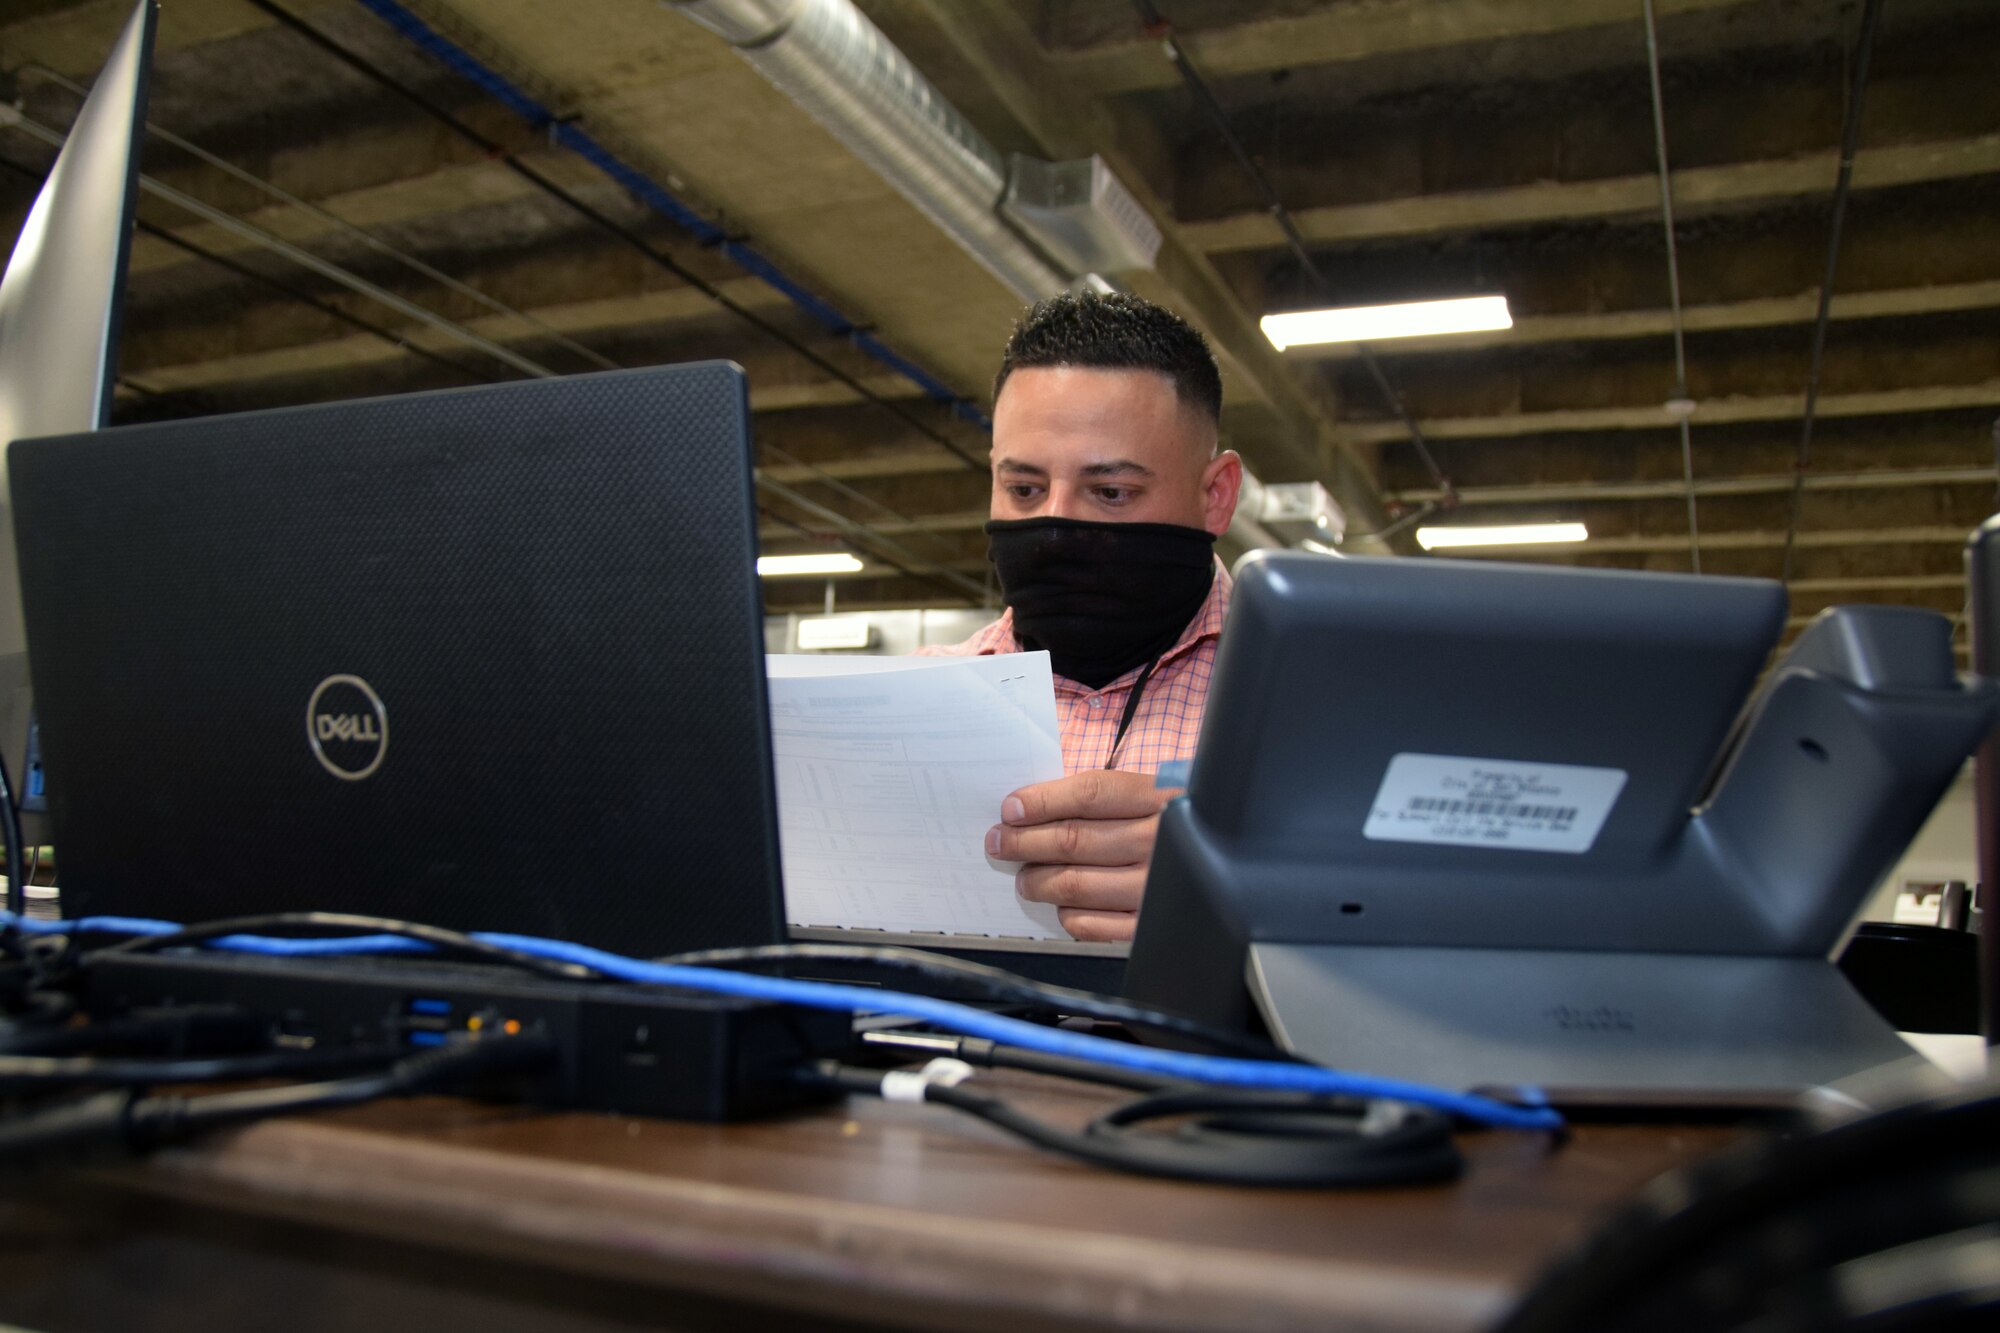 Tech. Sgt. Juan Vazquez Garcia, 433rd Medical Group, processes a COVID-19 positive case report as a case investigator at the Bexar County COVID-19 Operations center in San Antonio, Texas Sept. 17, 2020.